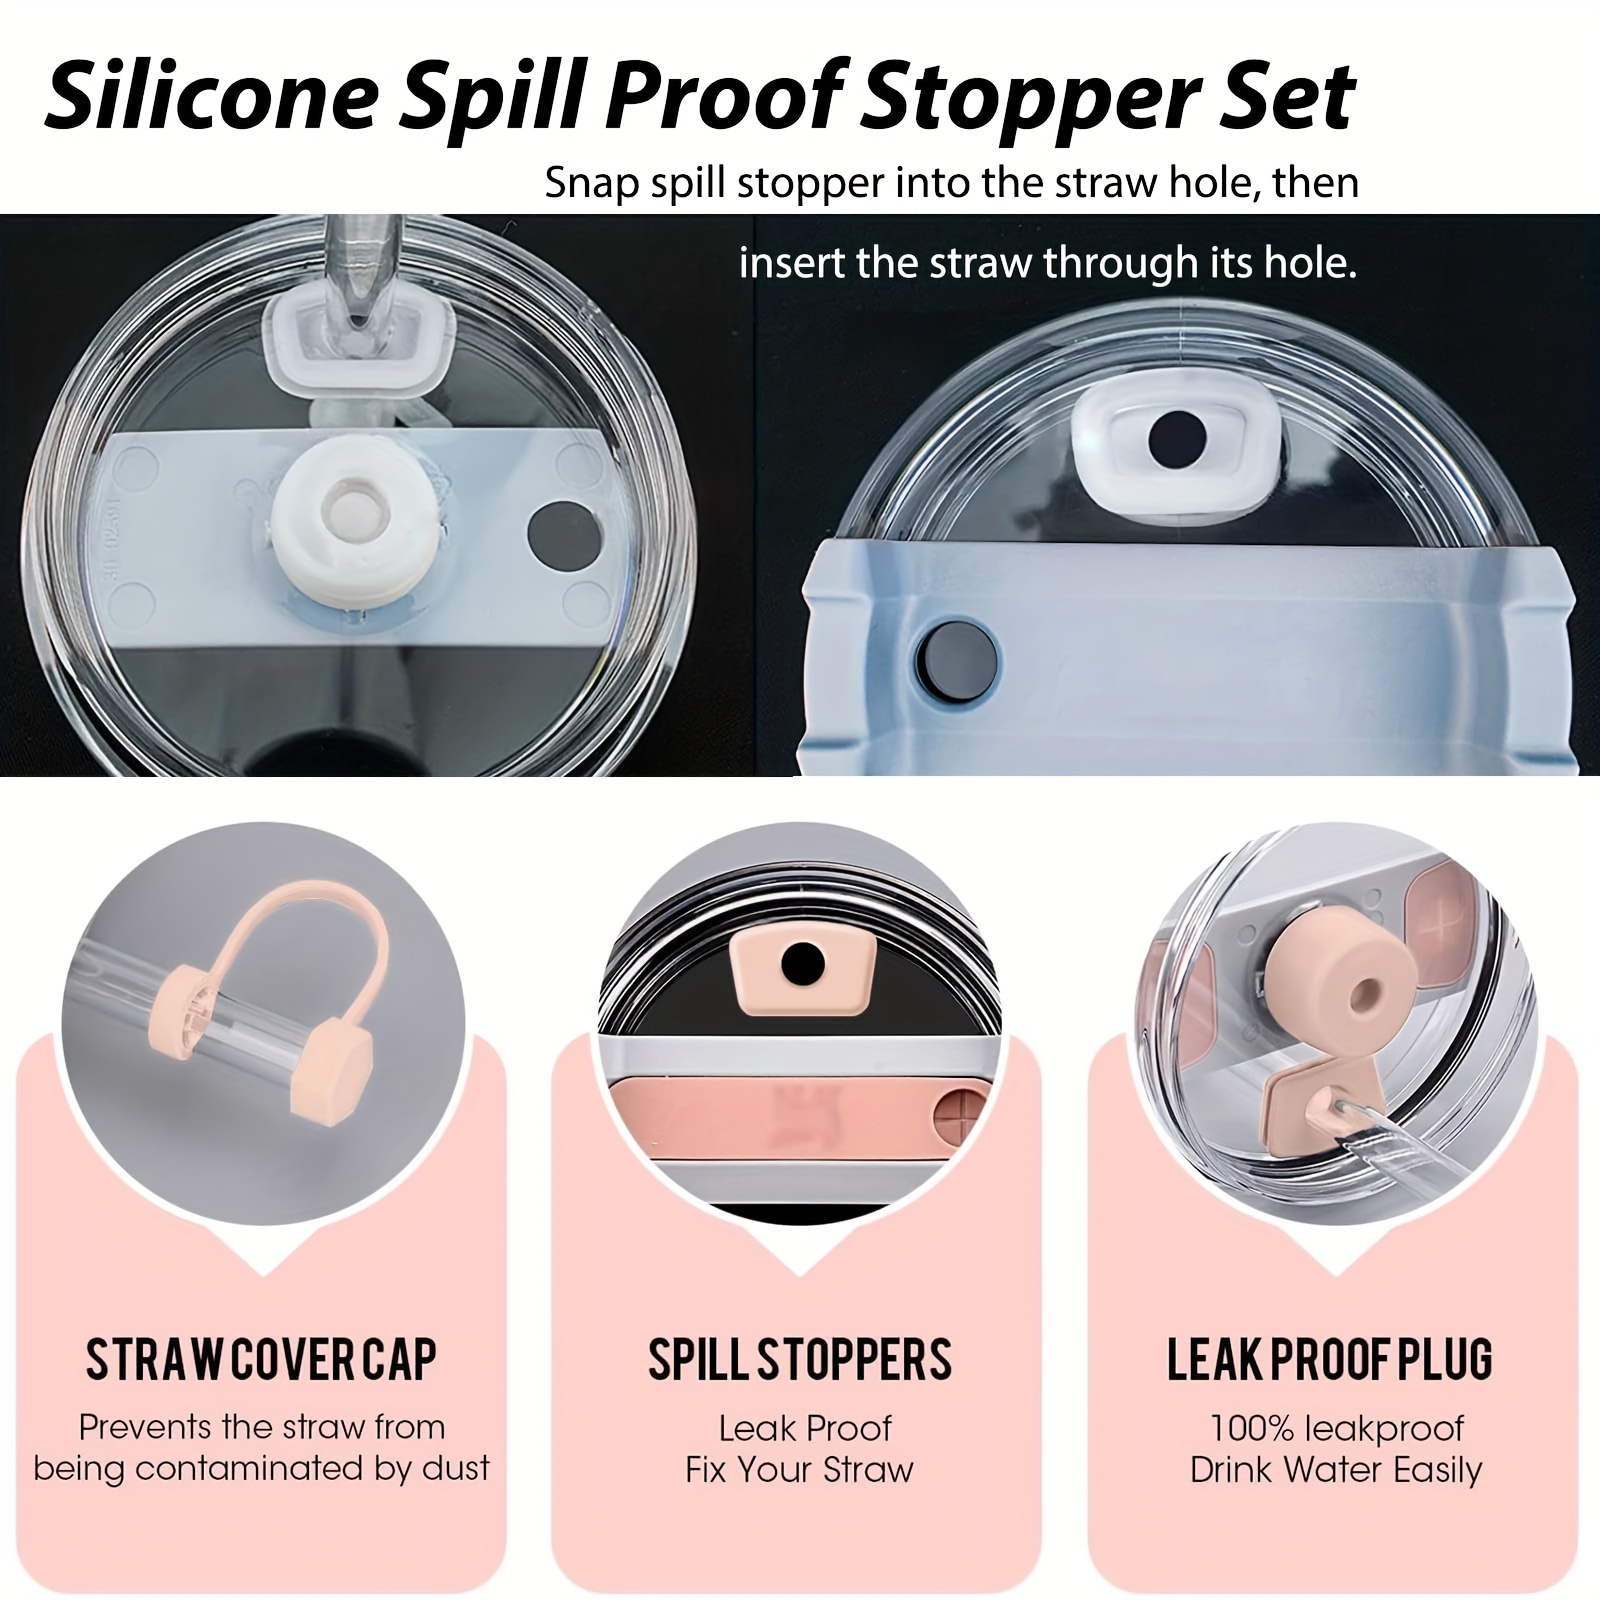 Silicone Spill Proof Stopper Set for Stanley Cup 1.0, 2 Pink Bottle Shaped  Straw Covers Caps 2 Drinking Straw Tips 2 Round Anti Leak Straw Stoppers 2